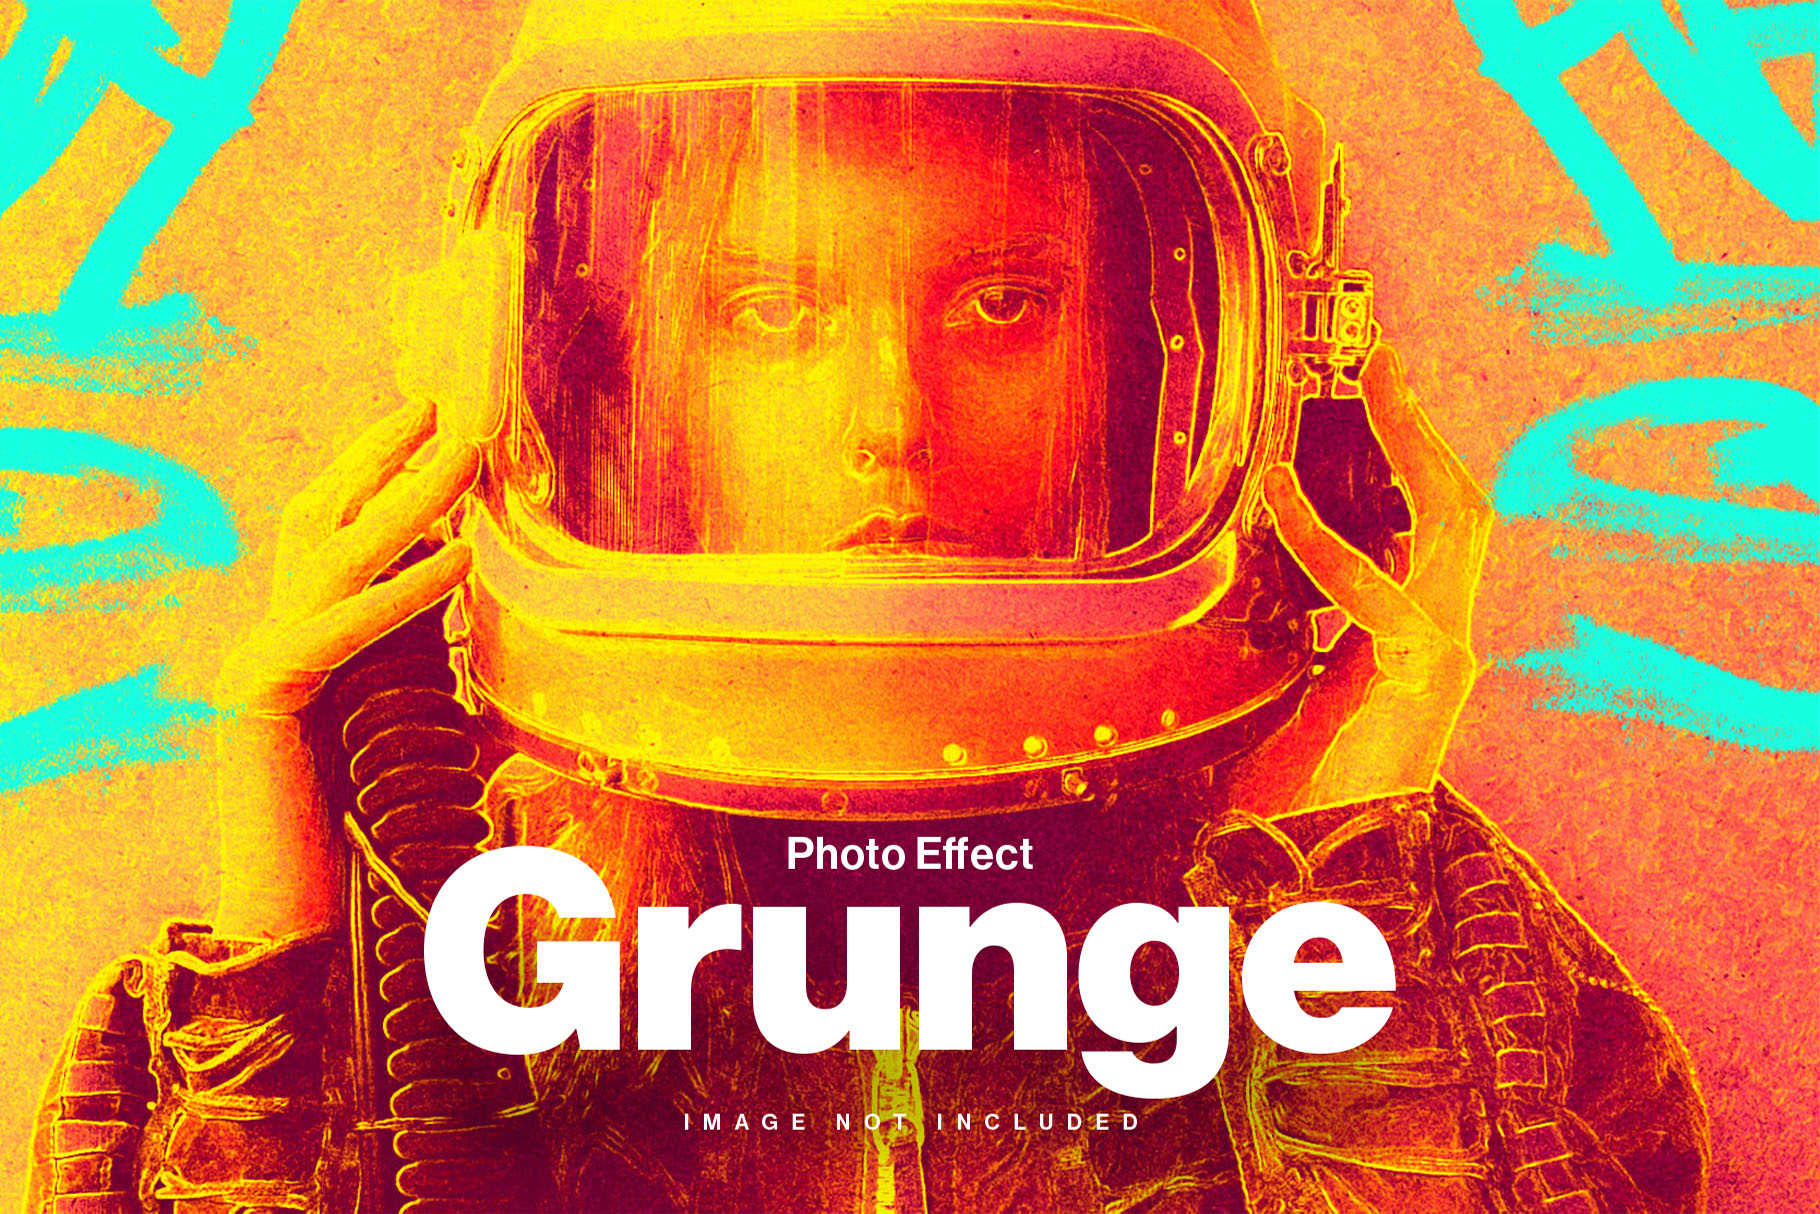 Abstract Grunge Photo Effect in PSD